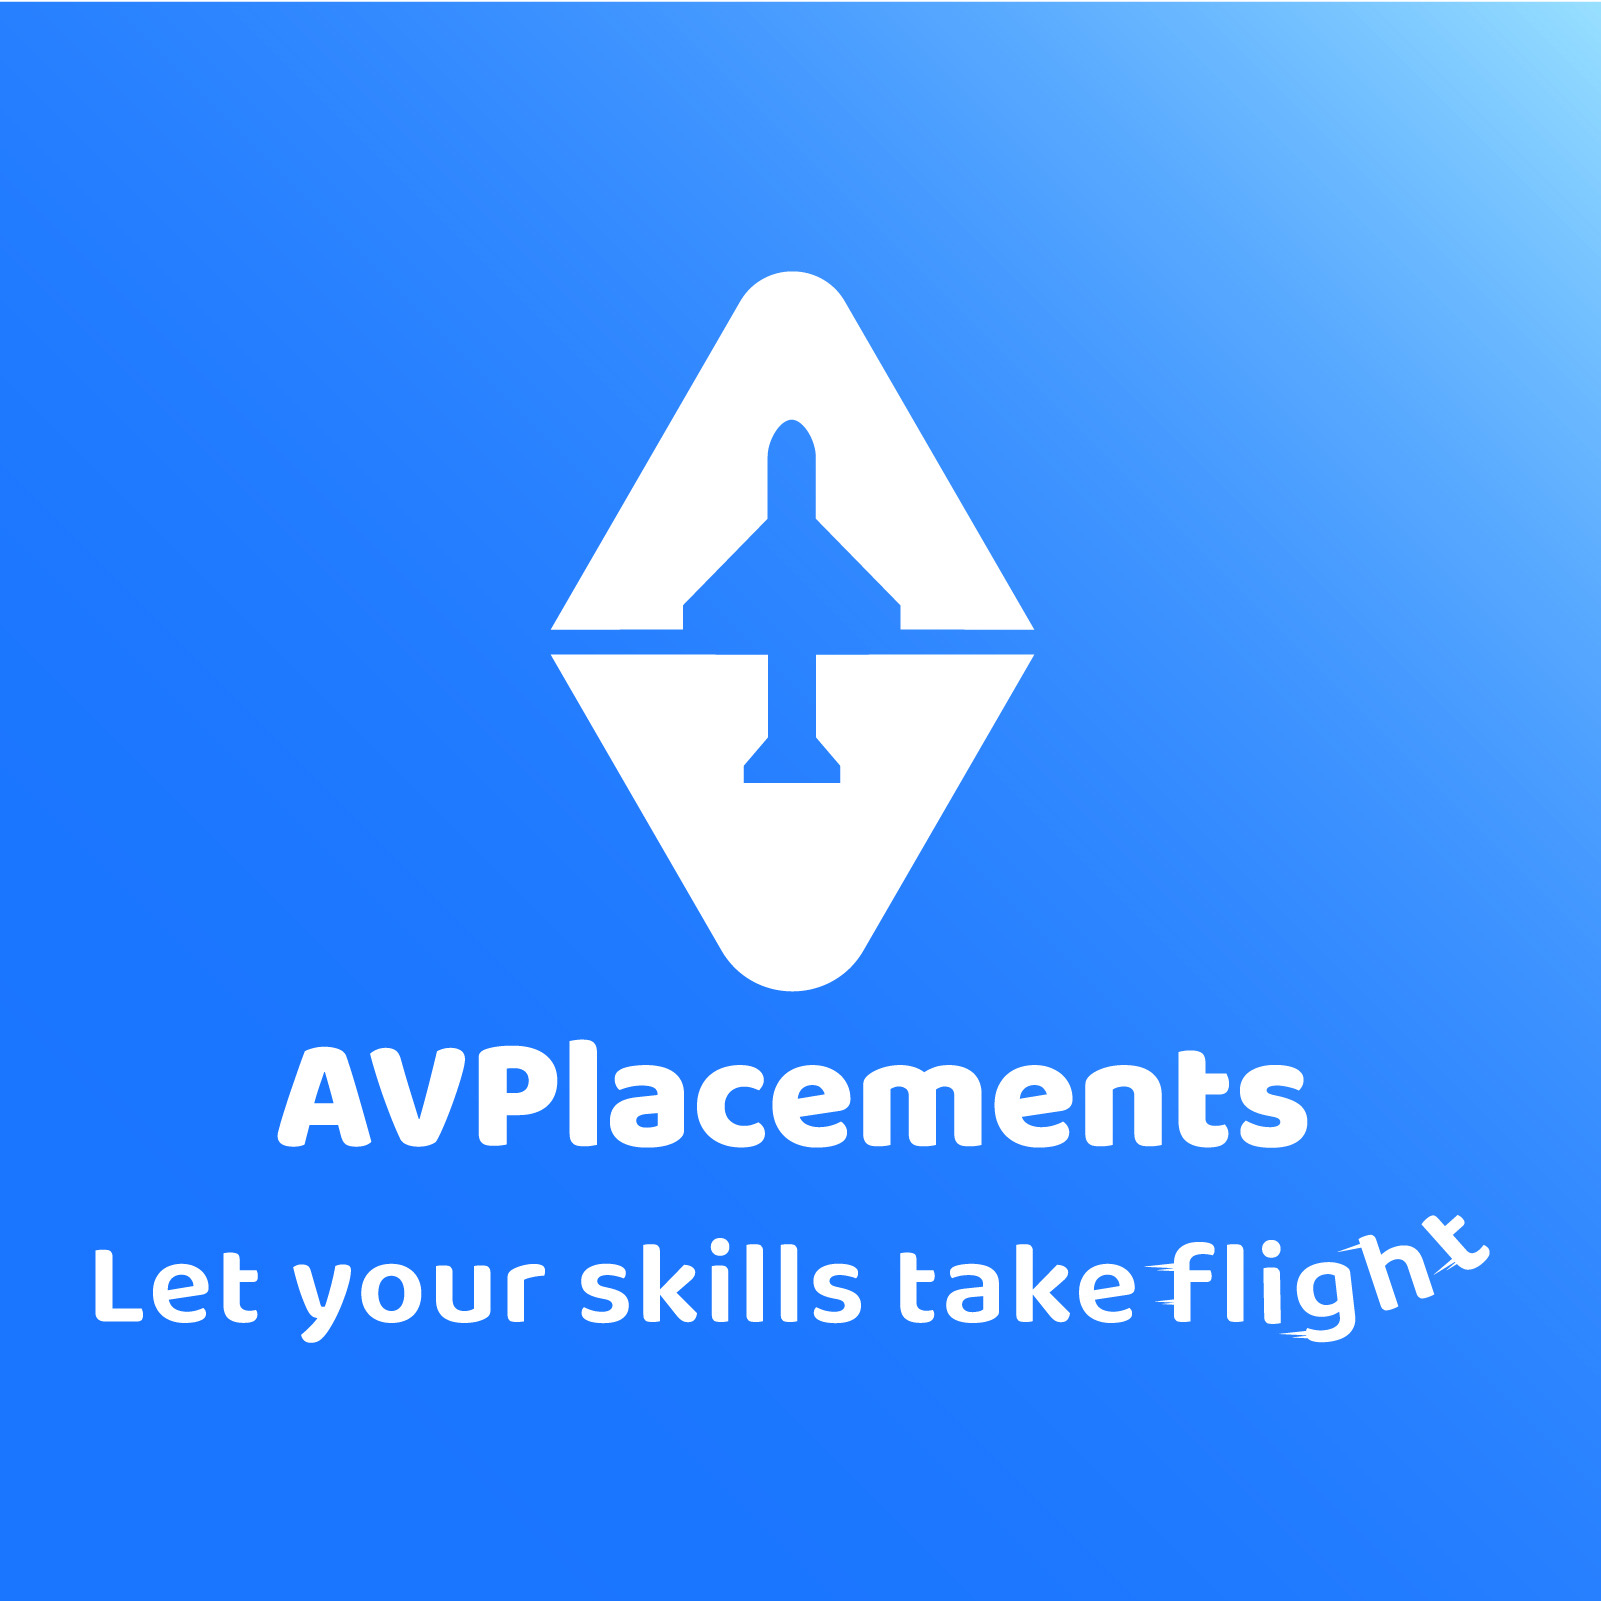 AVPlacements